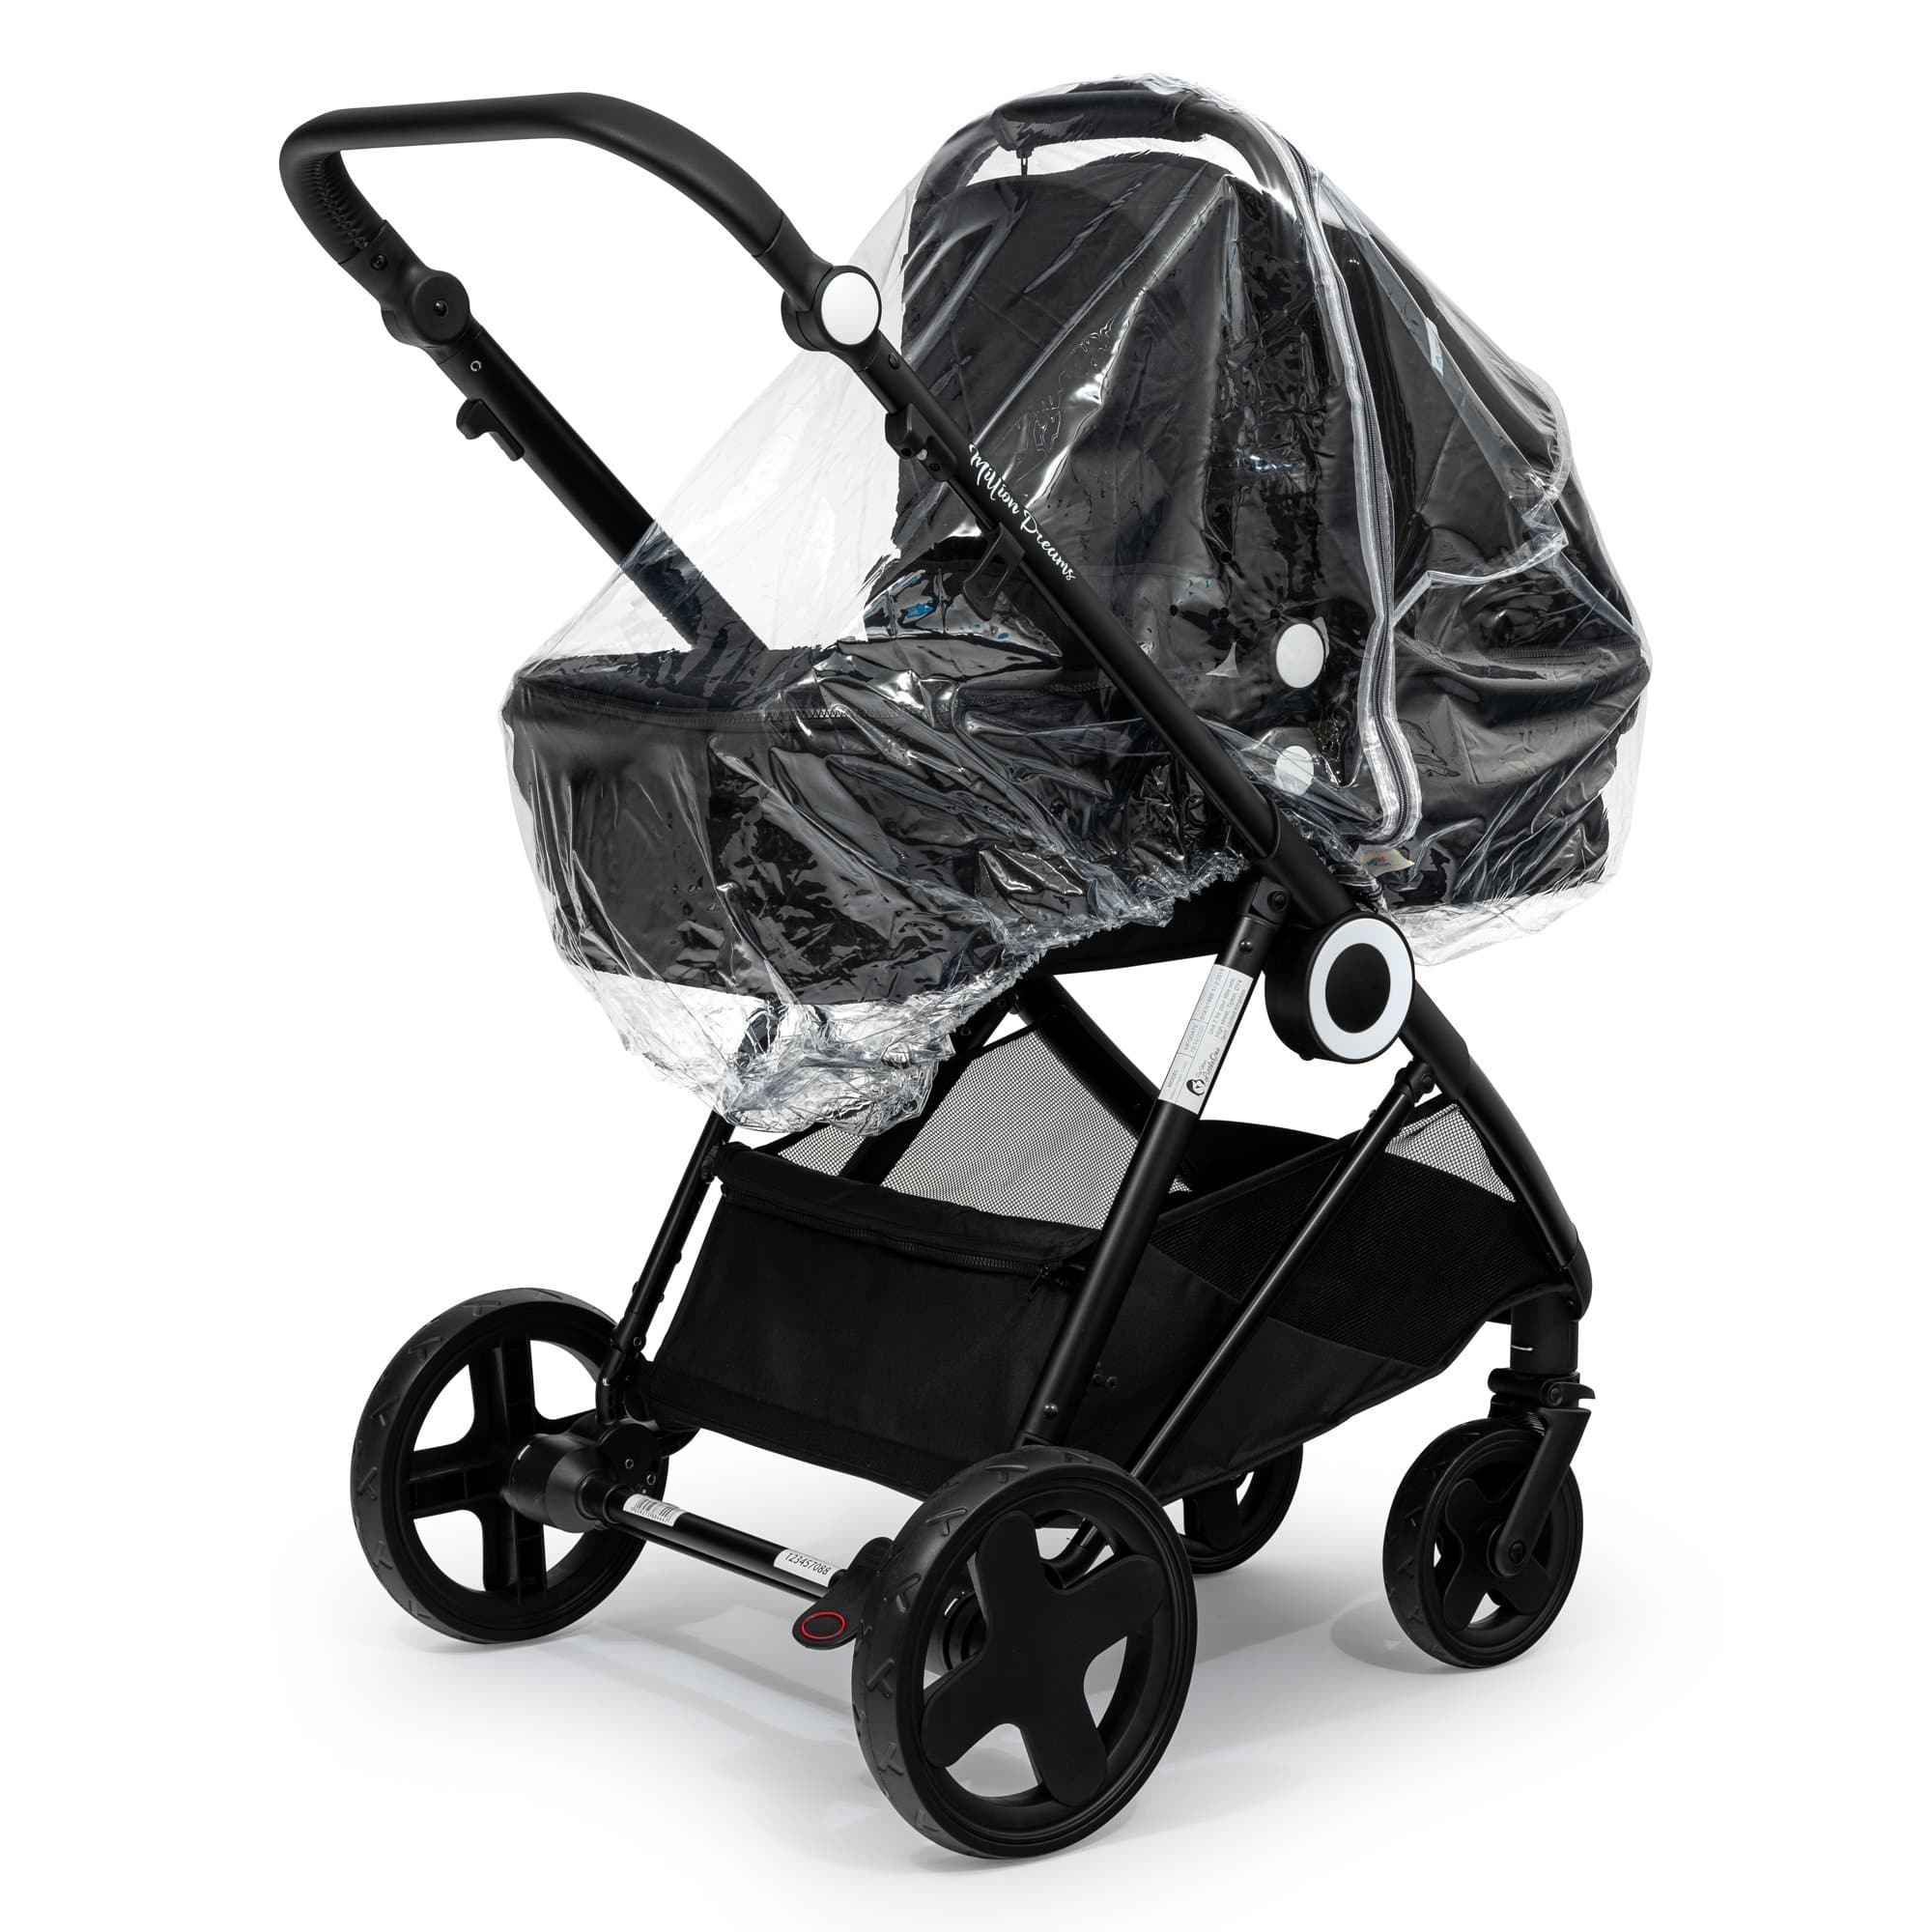 2 in 1 Rain Cover Compatible with Pericles - Fits All Models - For Your Little One